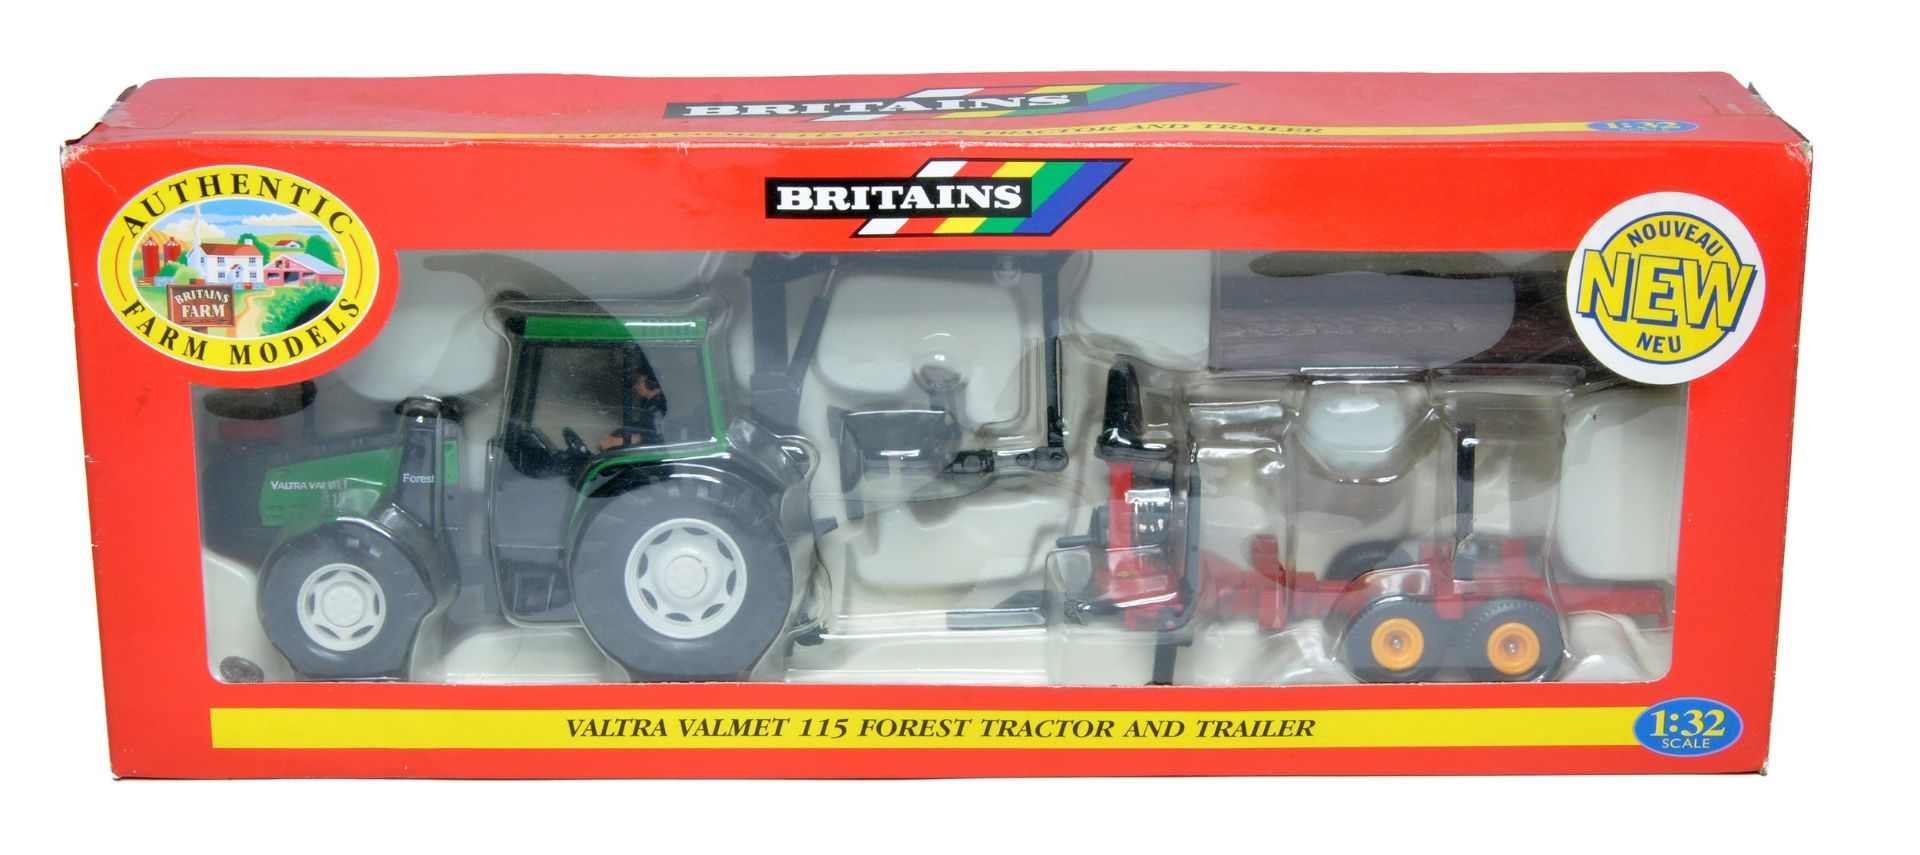 Britains Farm 1/32 diecast model issue comprising No. 09461 Valtra Valmet 115 Forest Tractor and